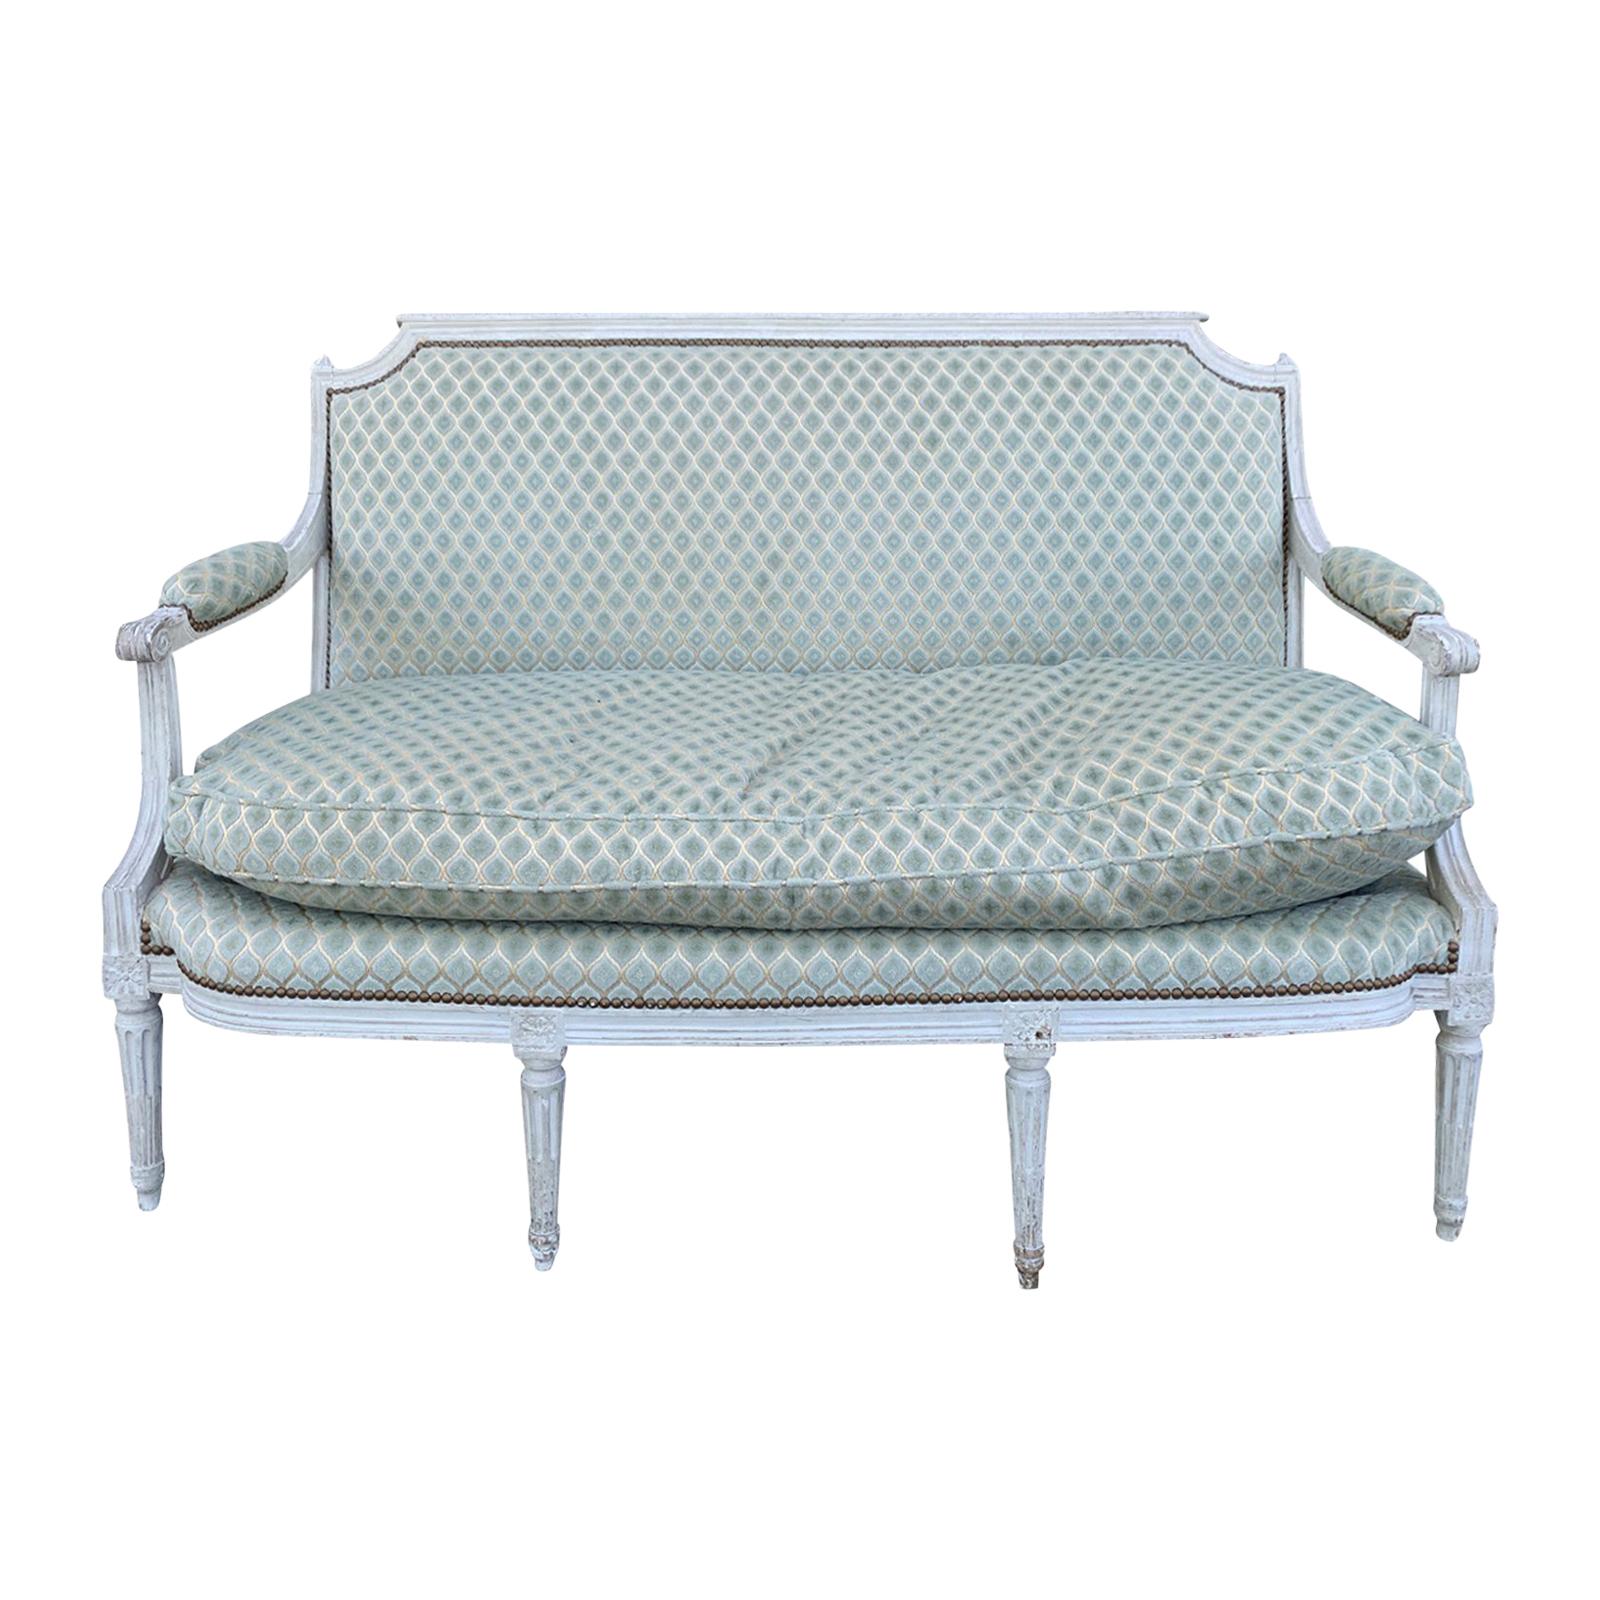 18th-19th Century French Louis XVI Style Painted and Upholstered Settee